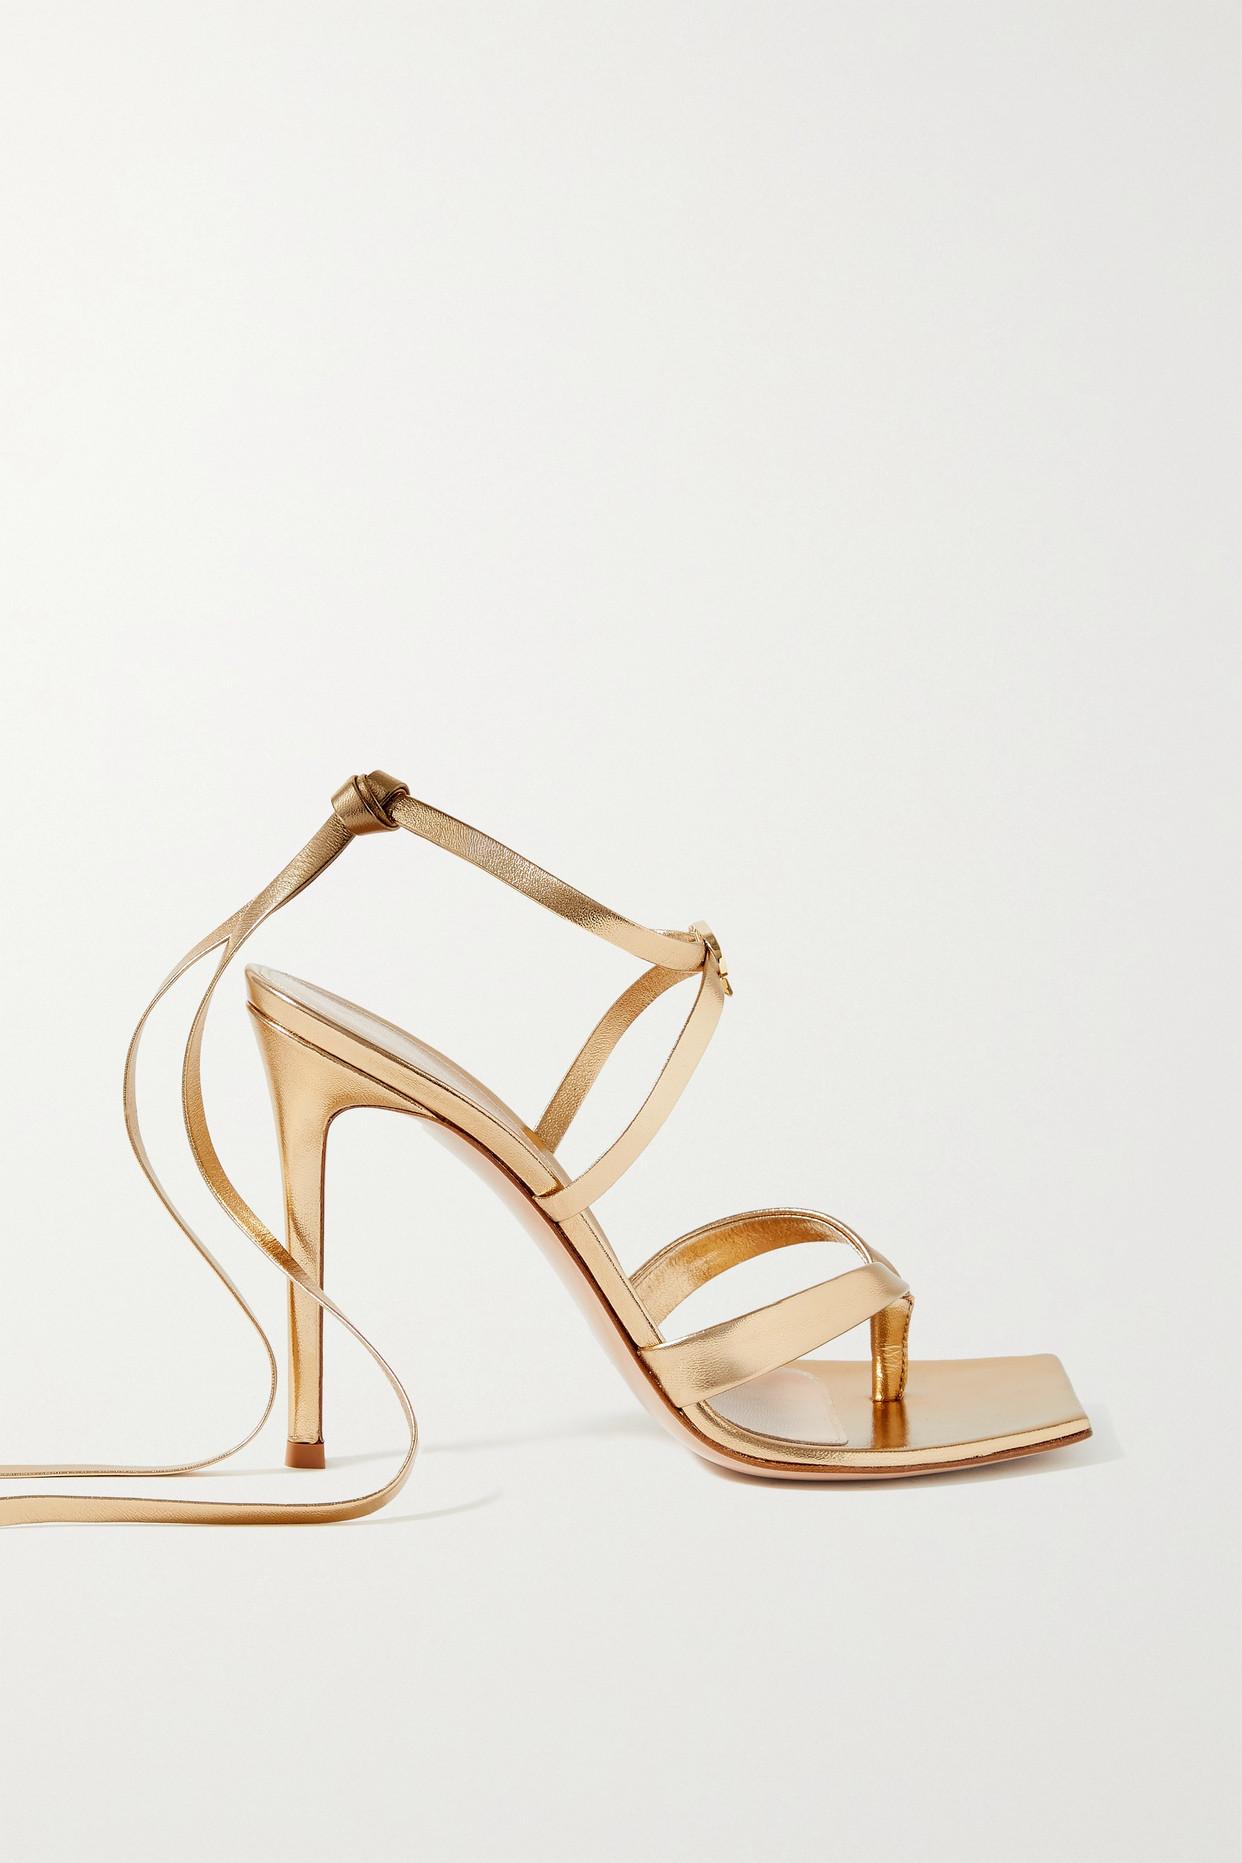 ☆ Gianvito Rossi COSMIC SANDALS ラバー レザーソール ピンク - www 